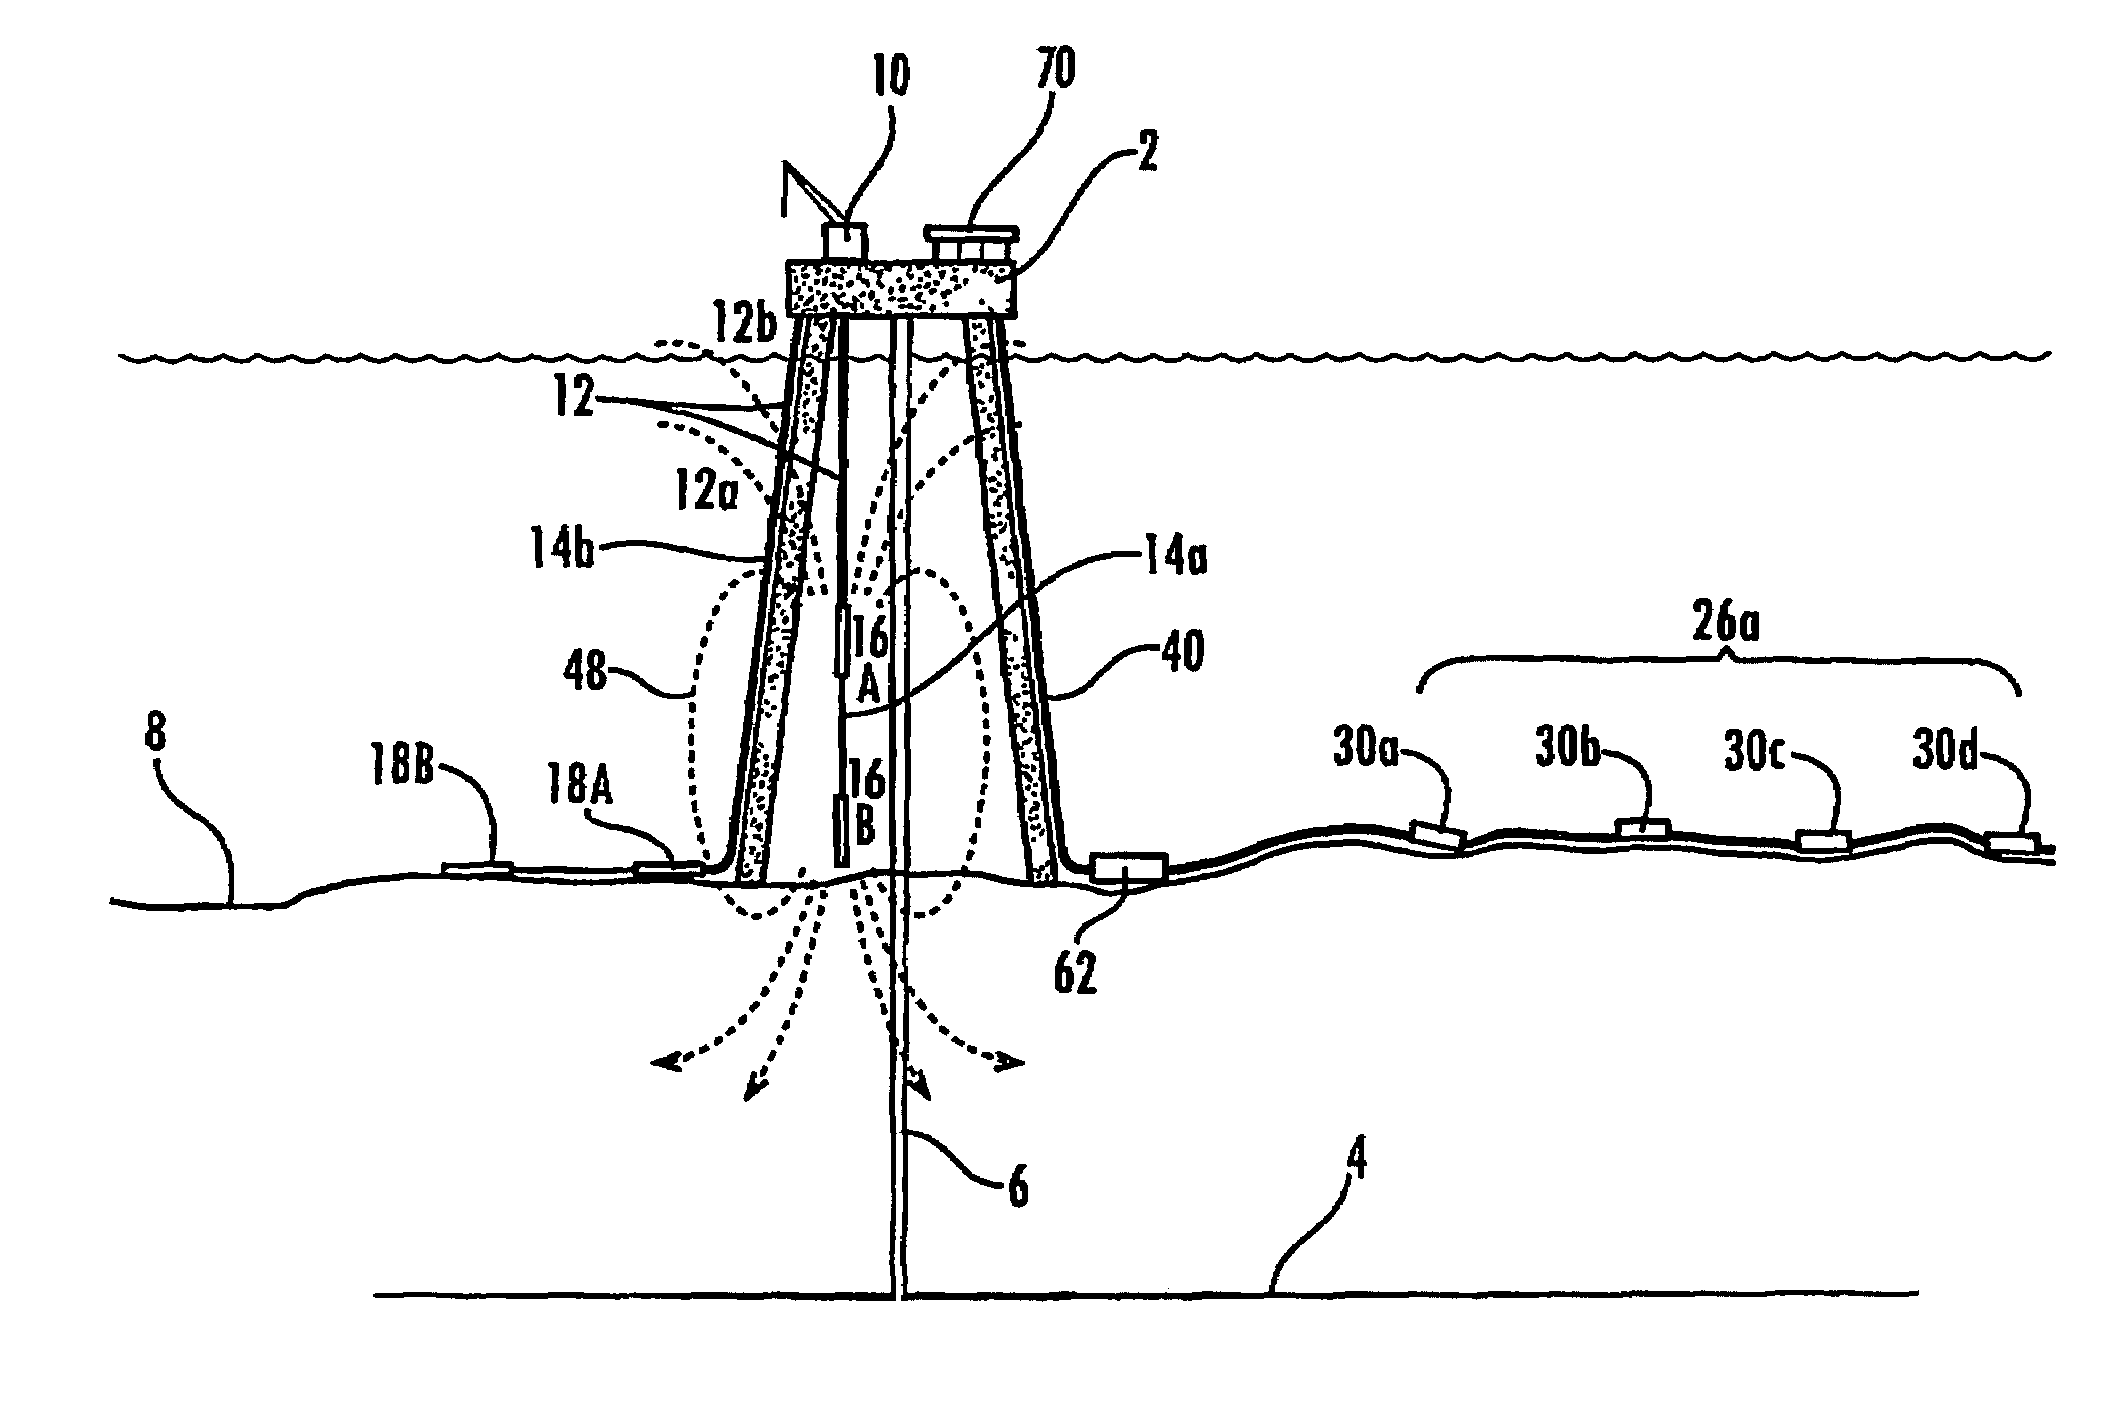 System and method for hydrocarbon reservoir monitoring using controlled-source electromagnetic fields